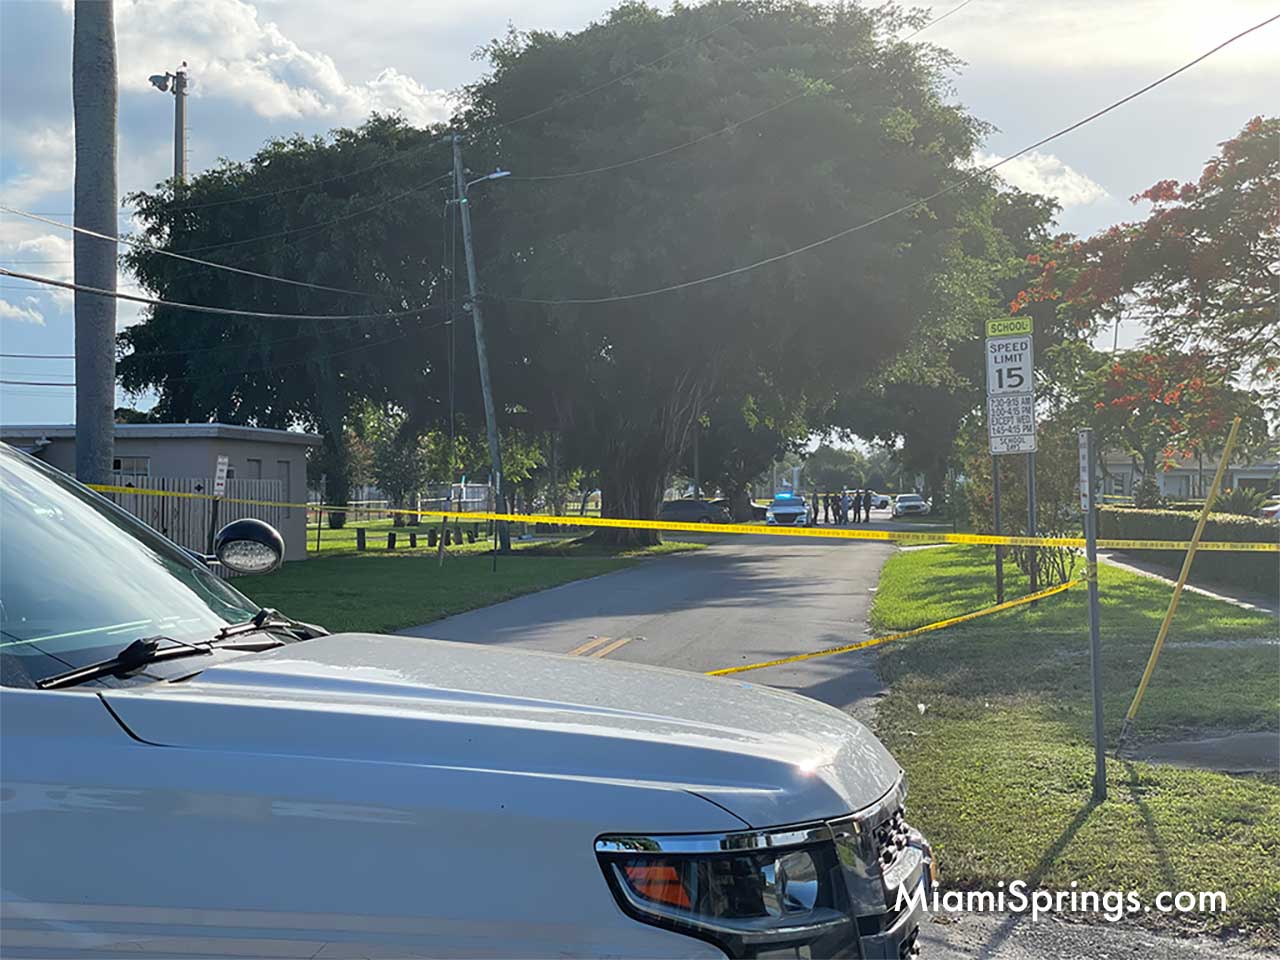 Miami Springs Police Investigation on Eastward Drive between Forrest Drive and East Drive